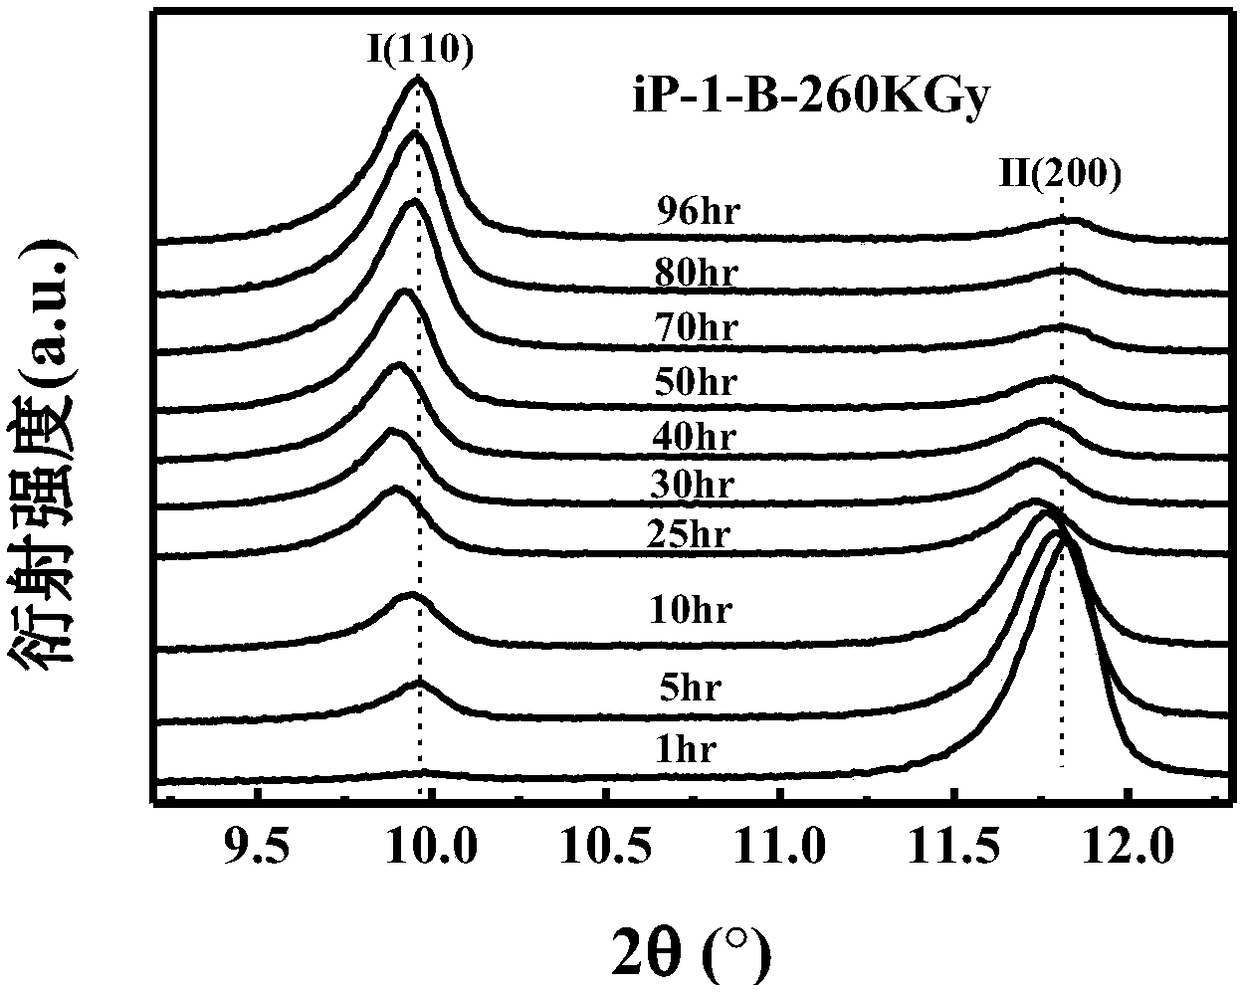 Method for promoting crystal form II-I transformation of isotactic poly-1-butylene through high energy electronic irradiation